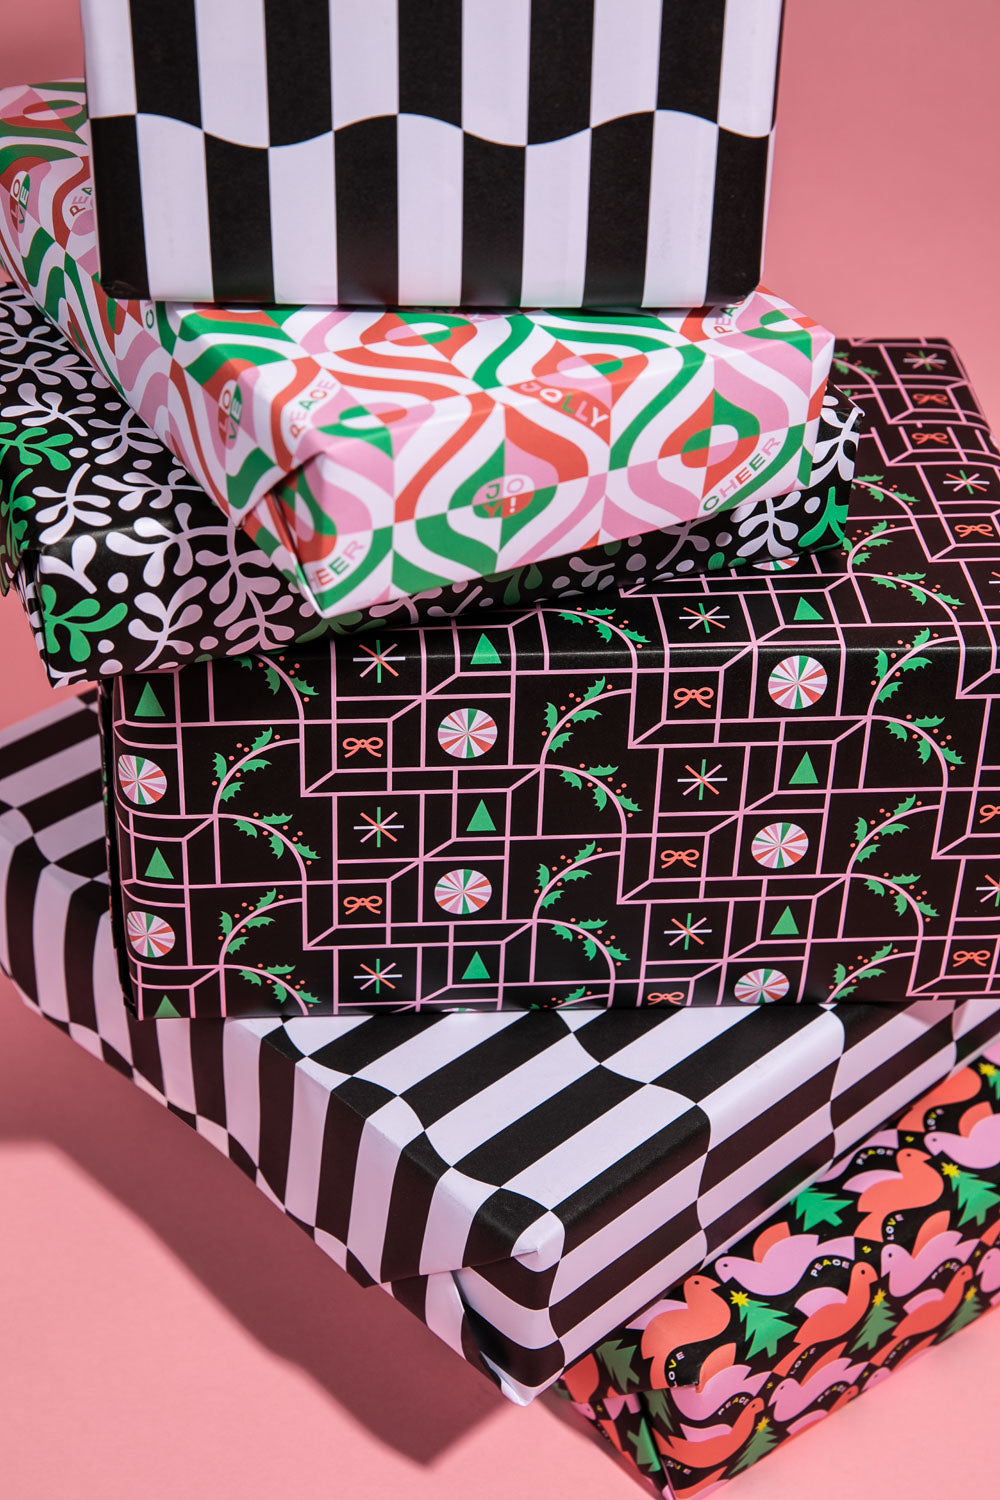 Stack of presents wrapped in retro holiday gift wrap with abstract patterns and holiday illustrations.